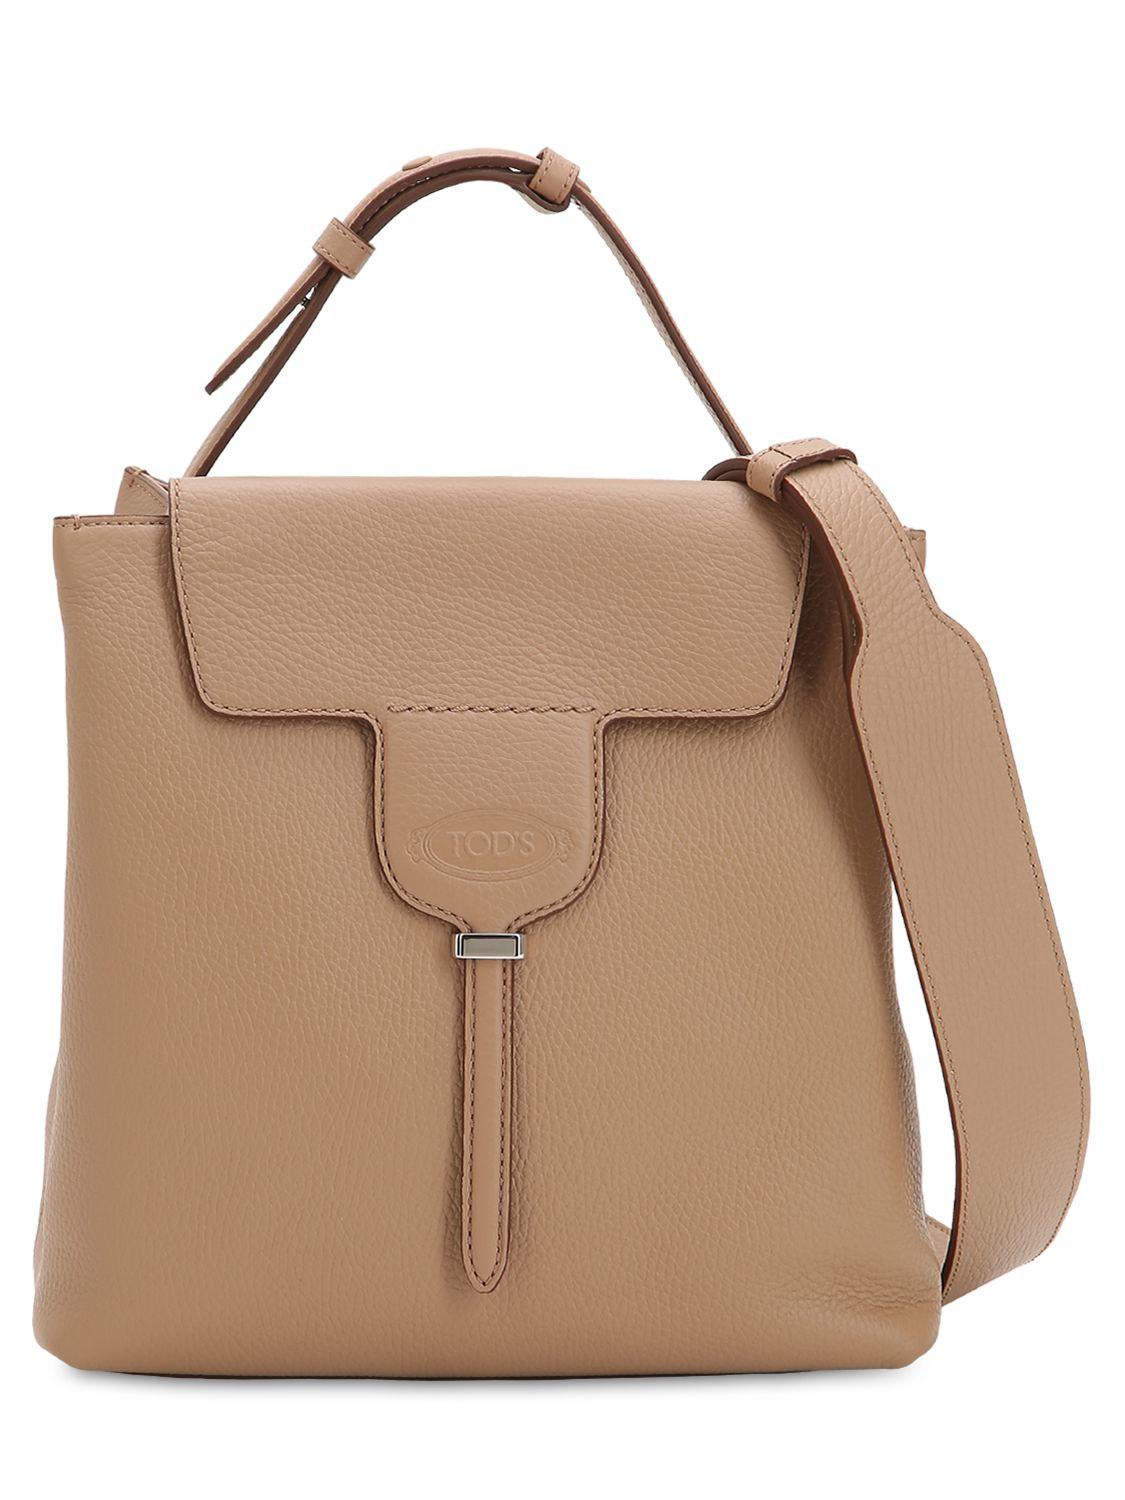 Tod's Small Joy Leather Shoulder Bag in Natural